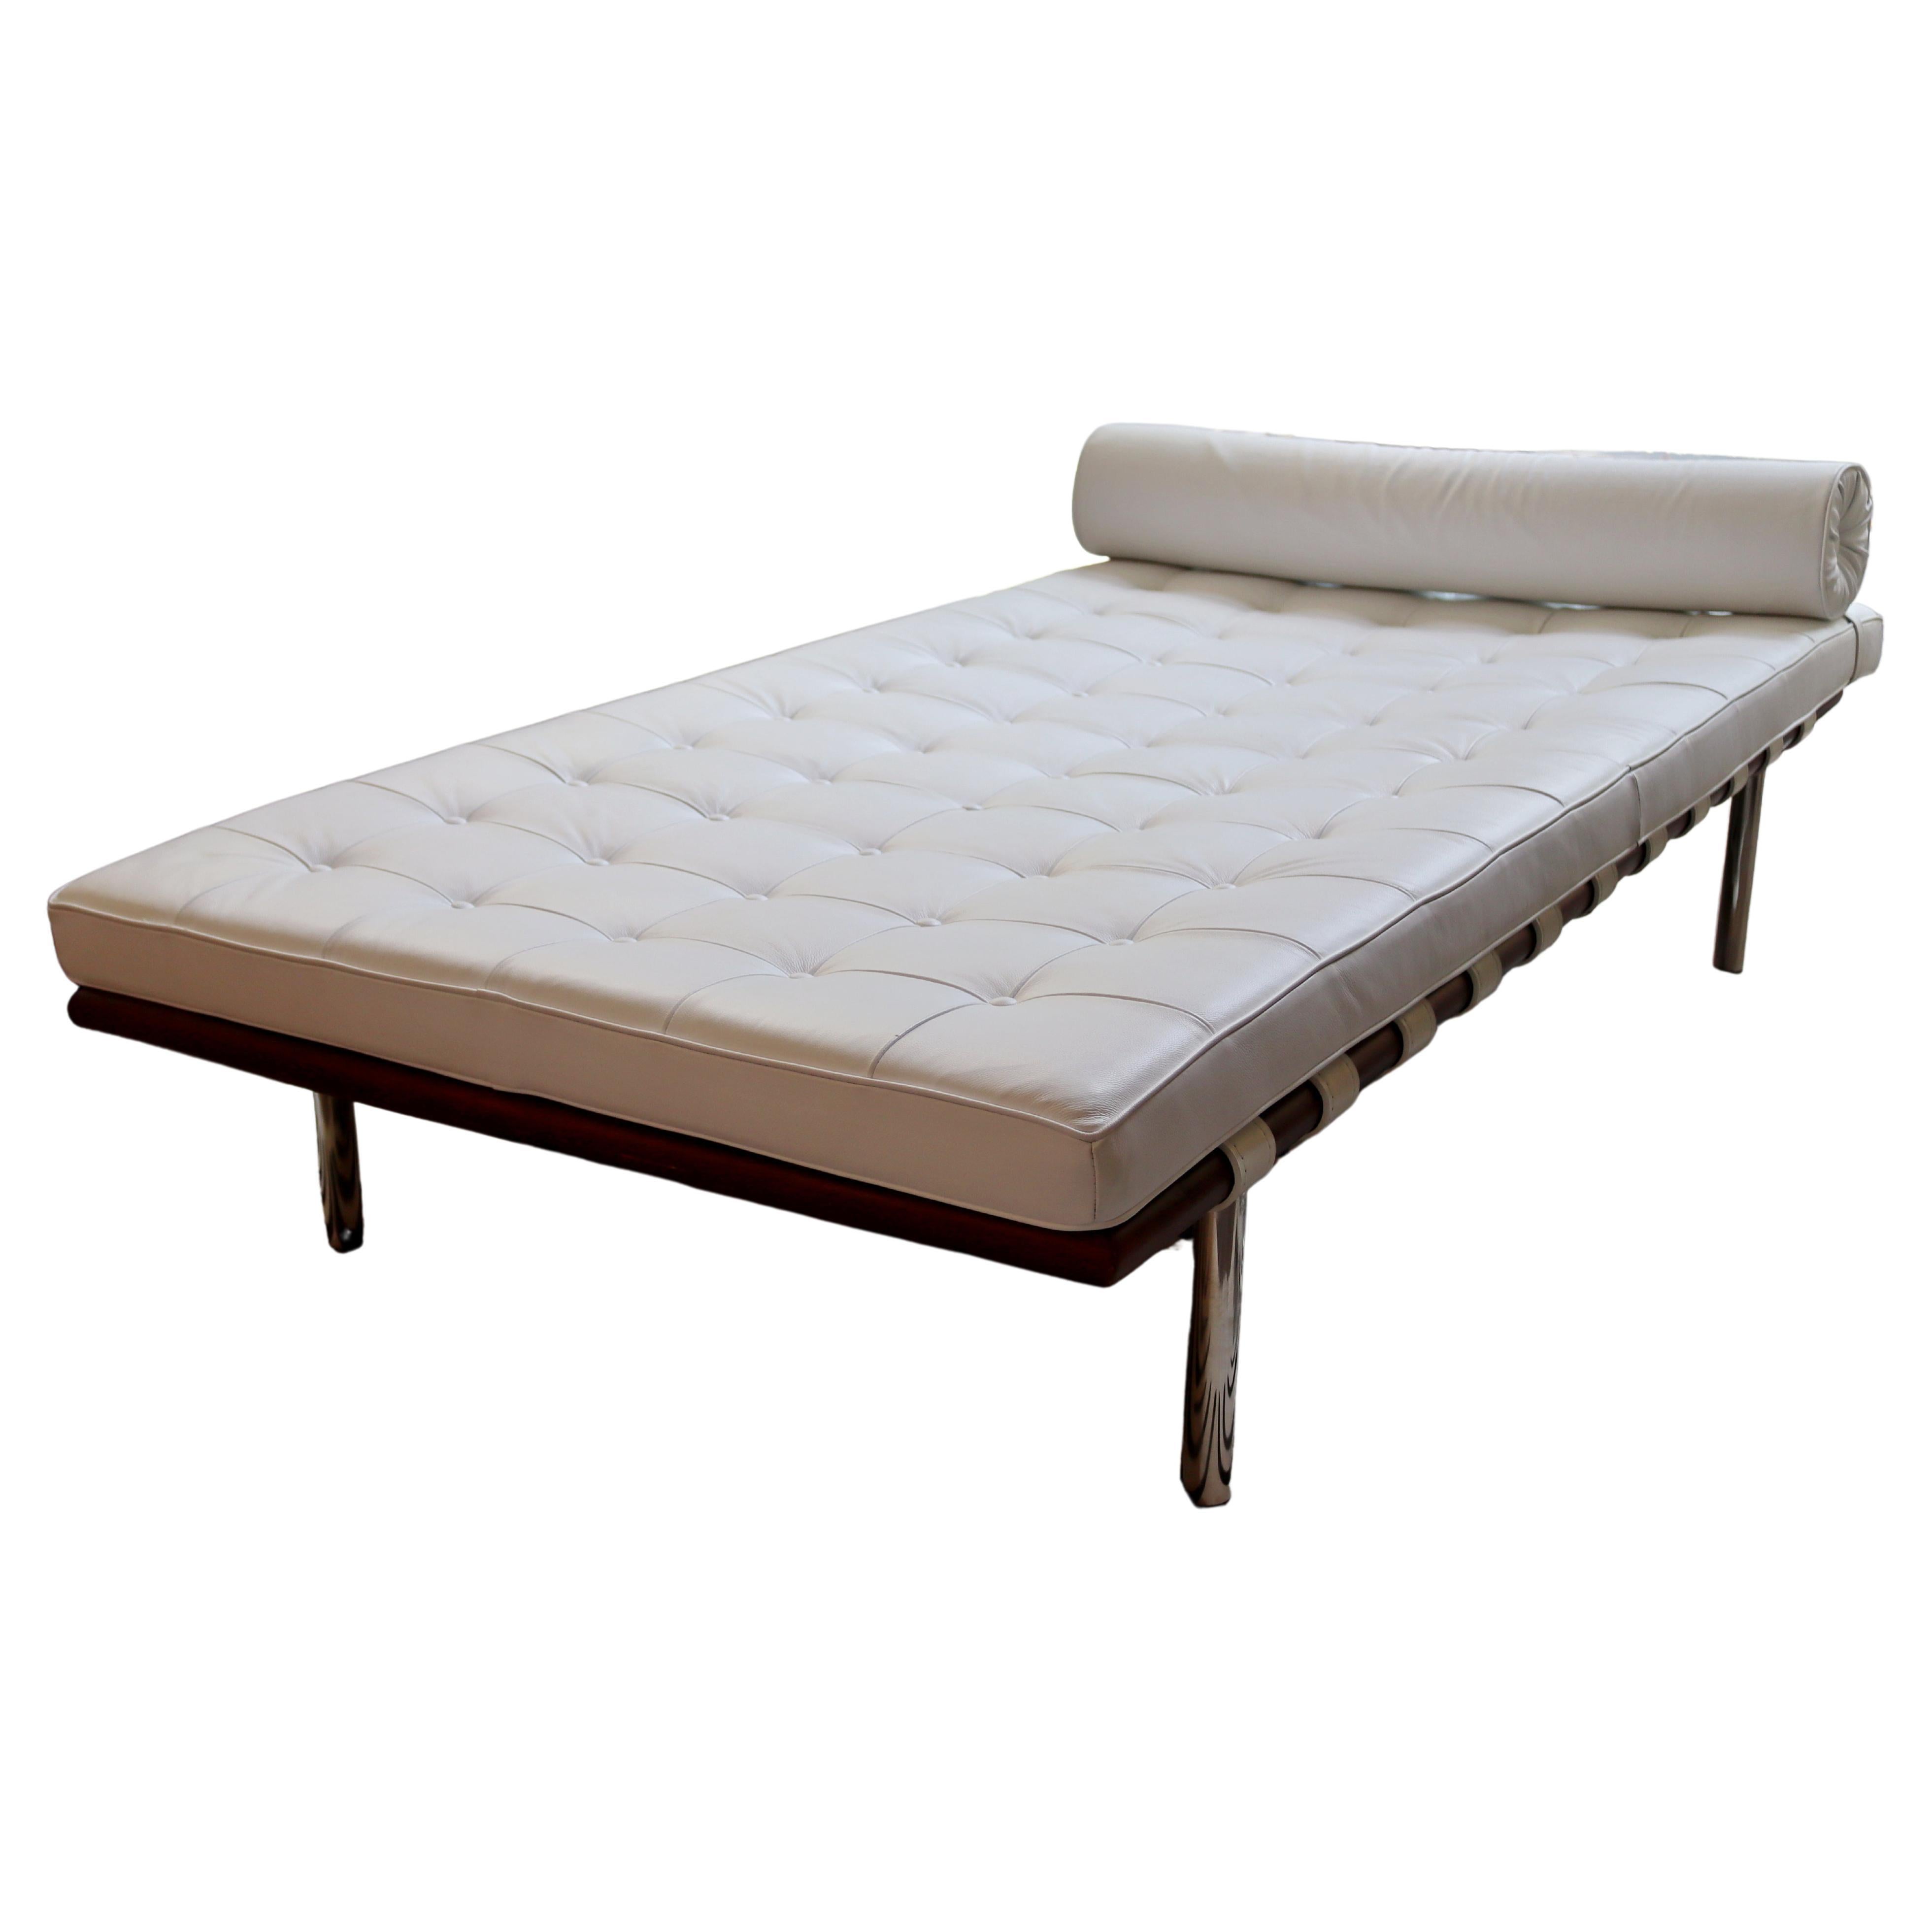 Modernist Rove Concepts Mies van der Rohe Barcelona White Daybed Chaise